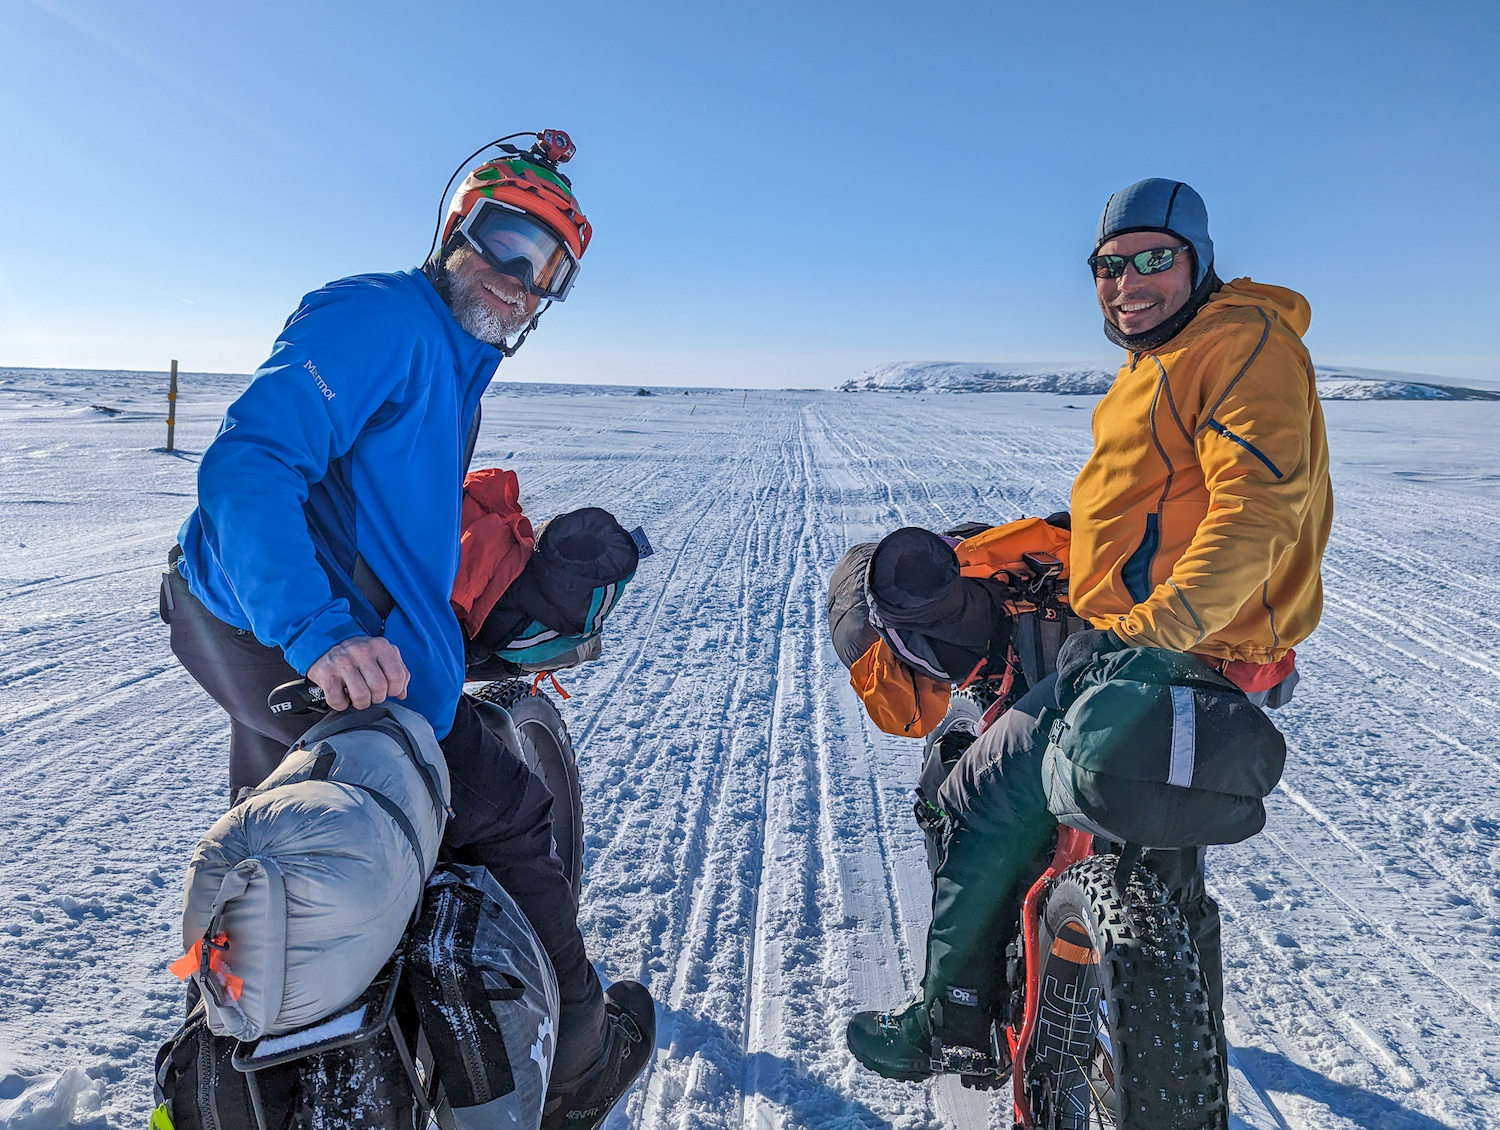 Two men pause astride bicycles on a snow-covered expanse in bright sunlight.